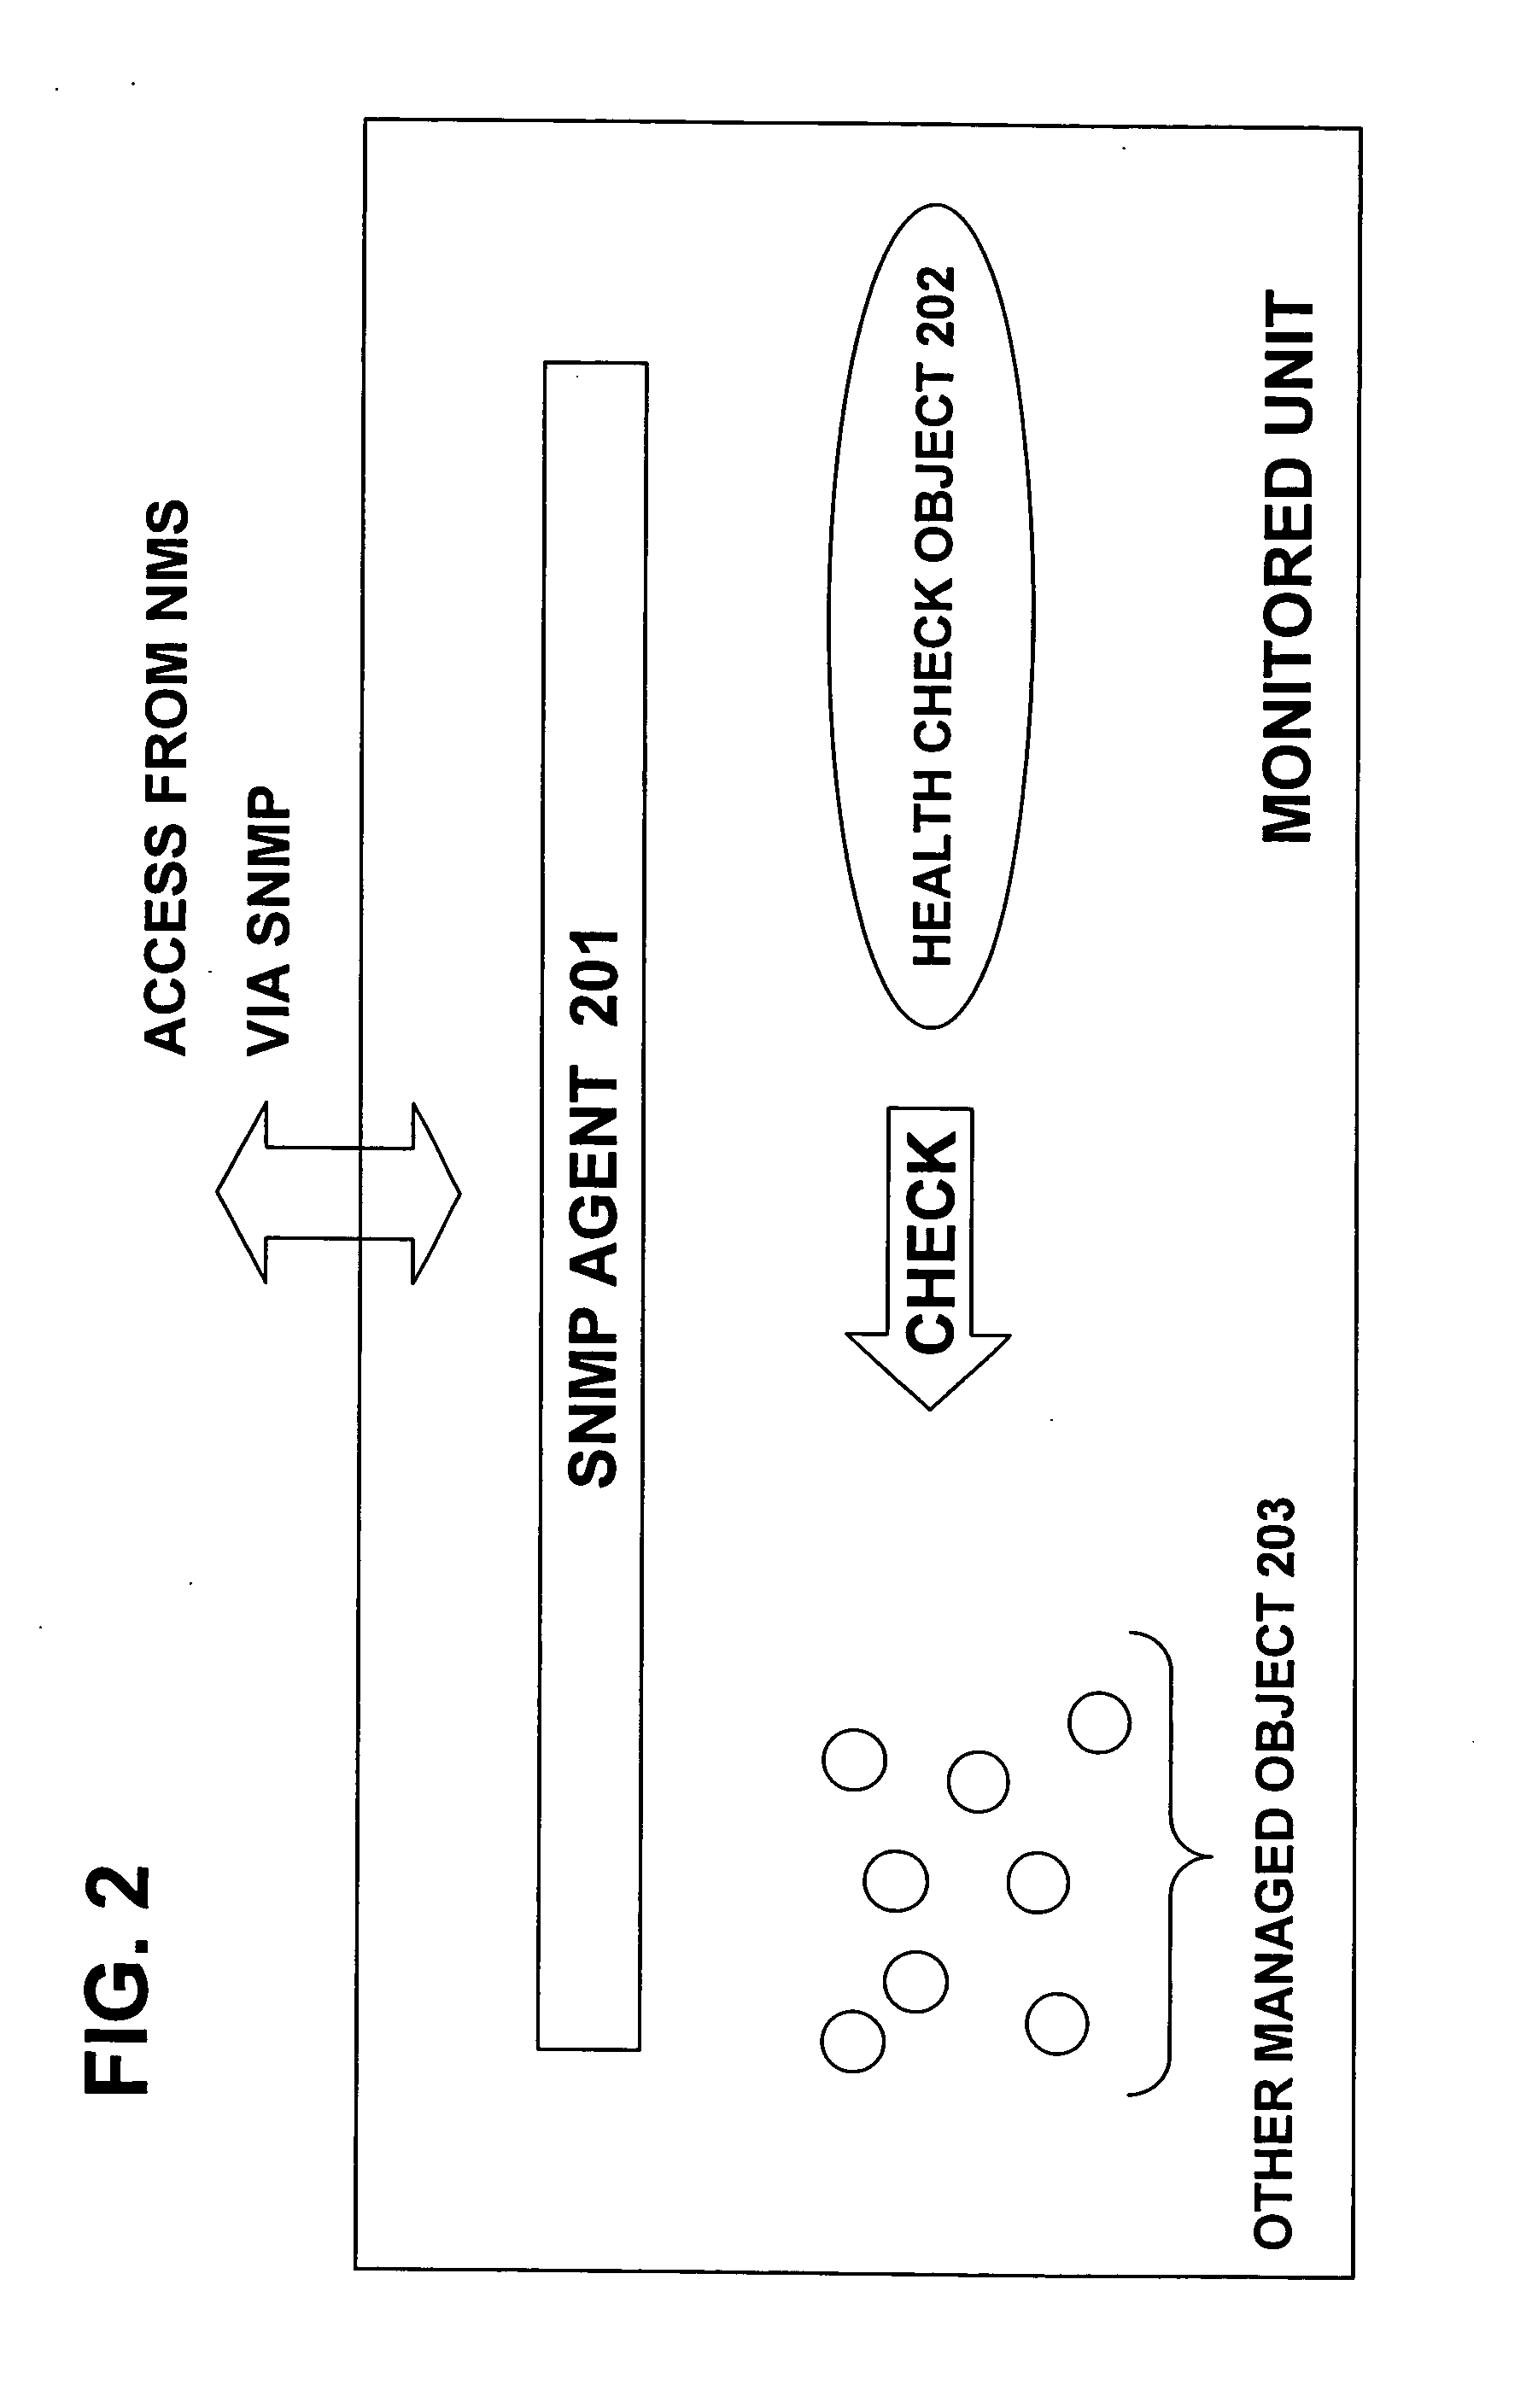 Network monitoring method and system